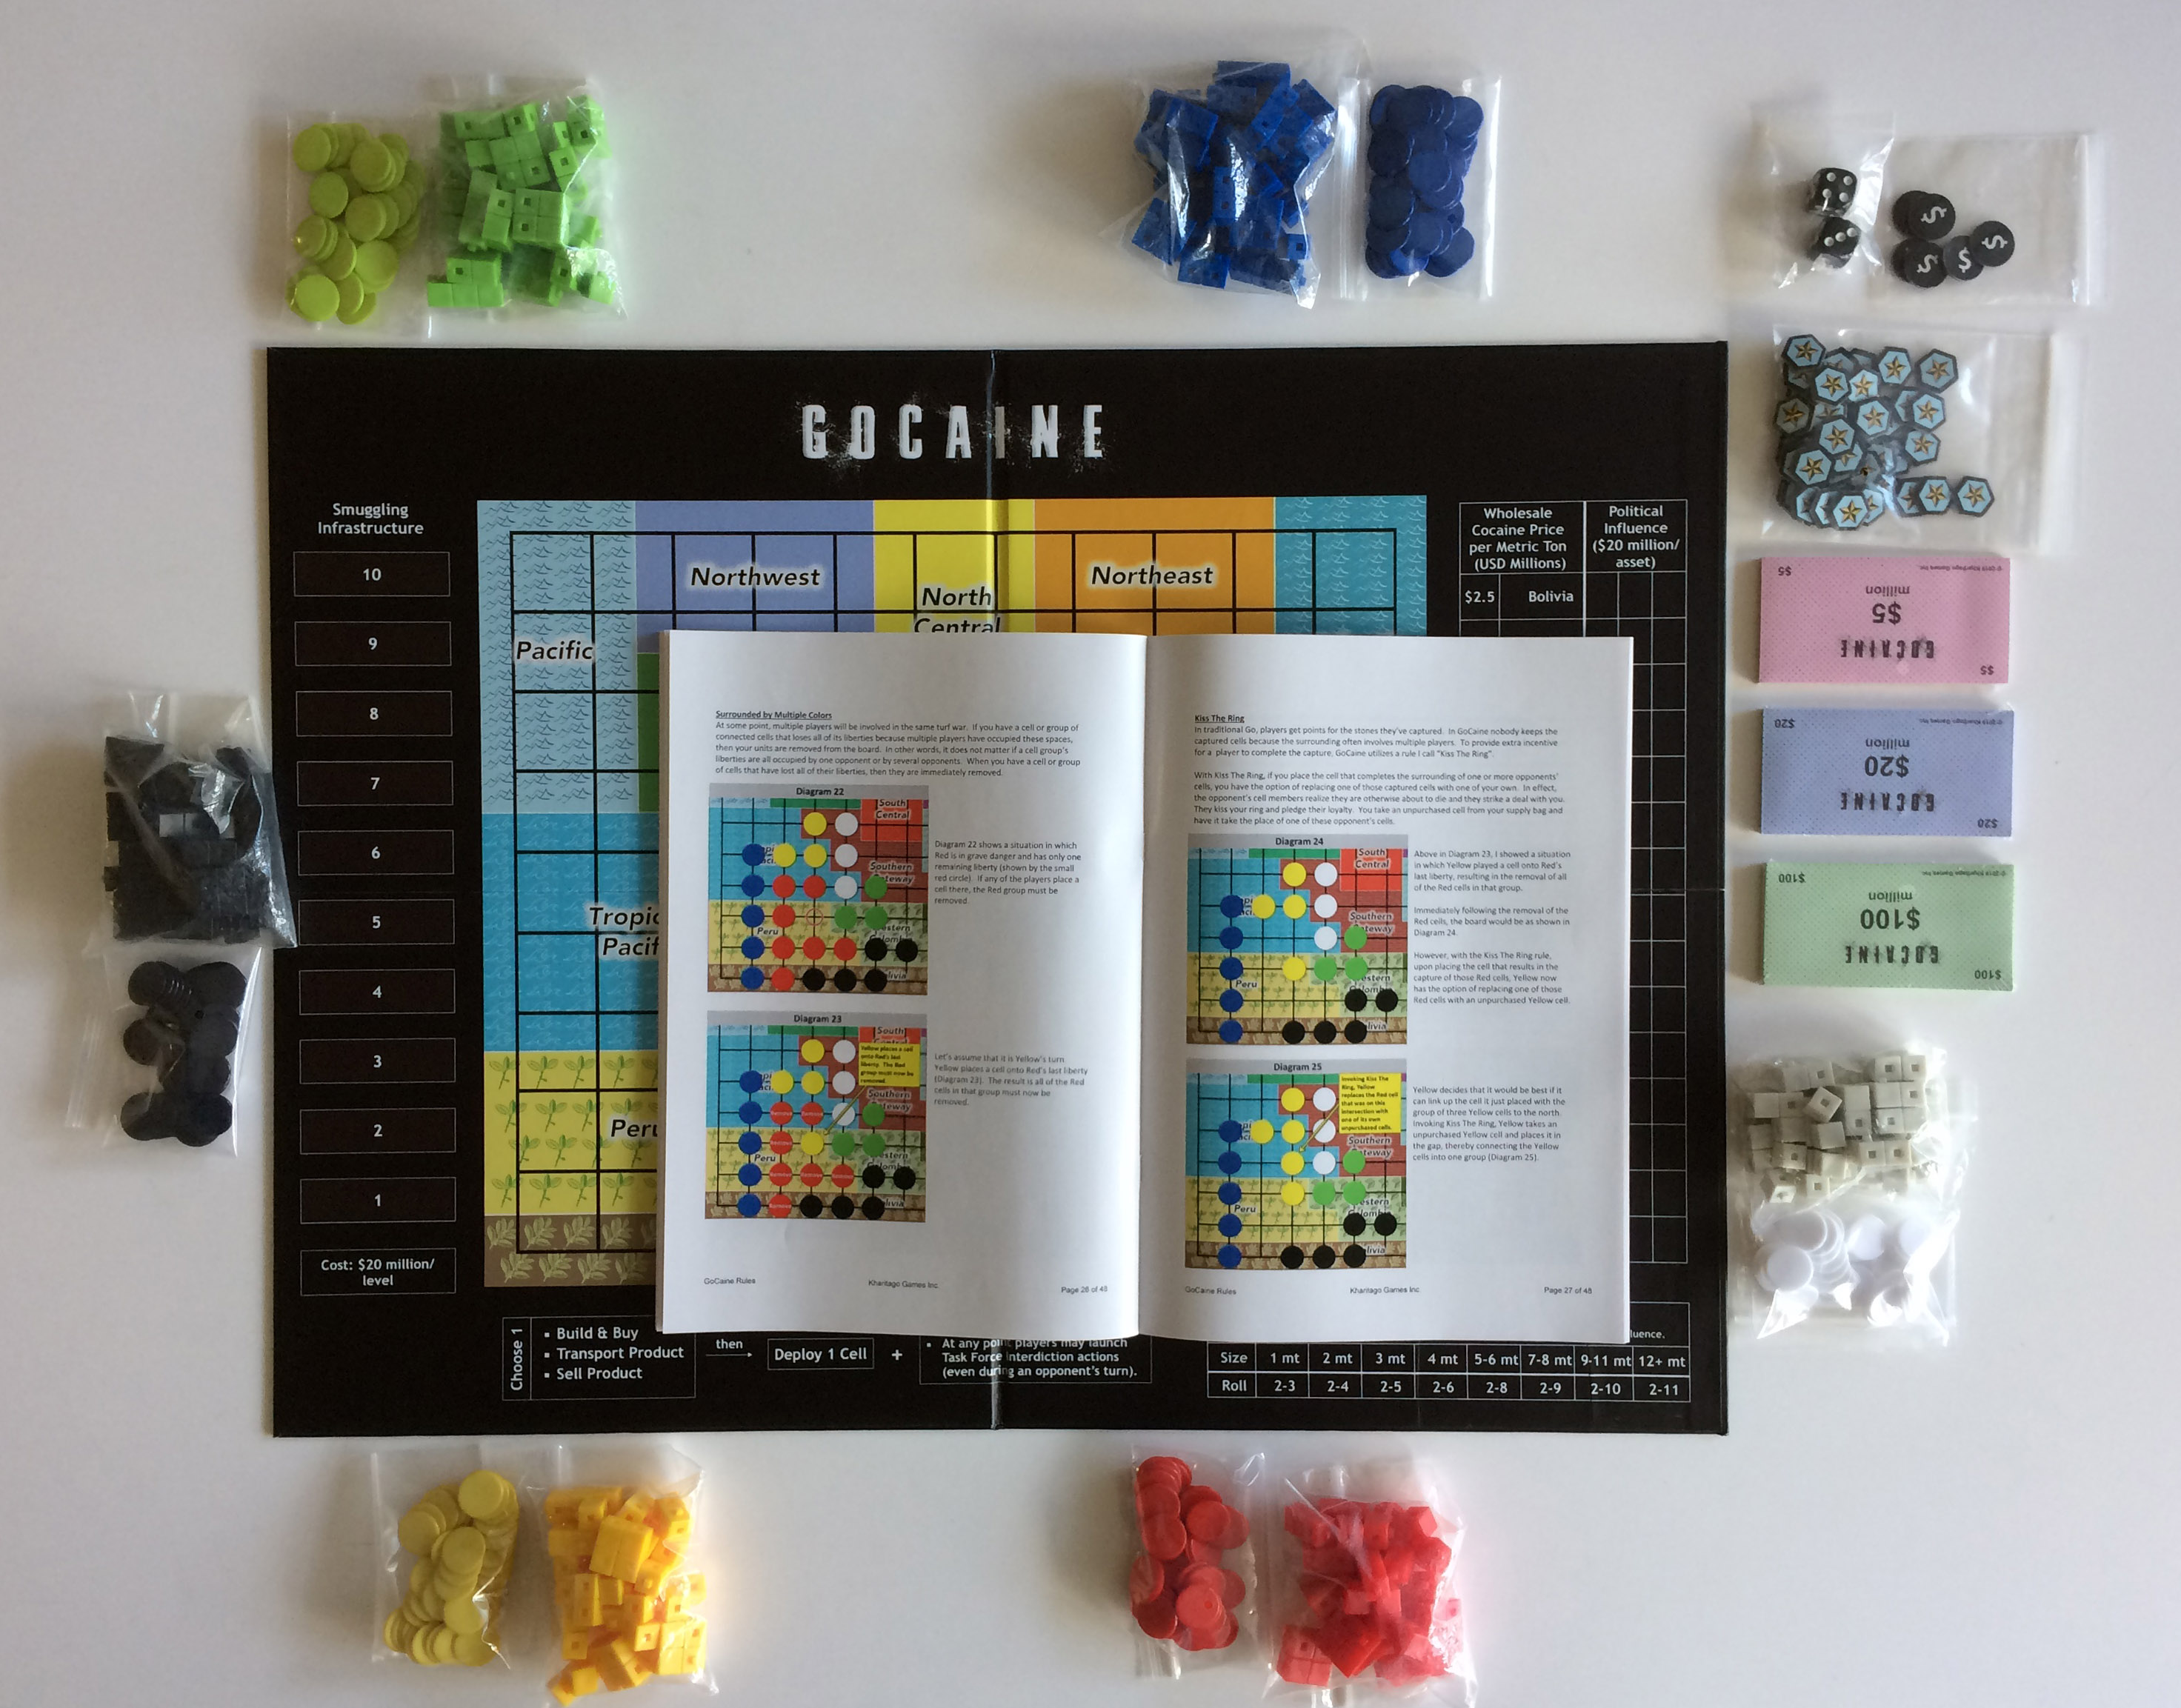 Photo of unpacked box of GoCaine showing components/pieces, board, and rule book.